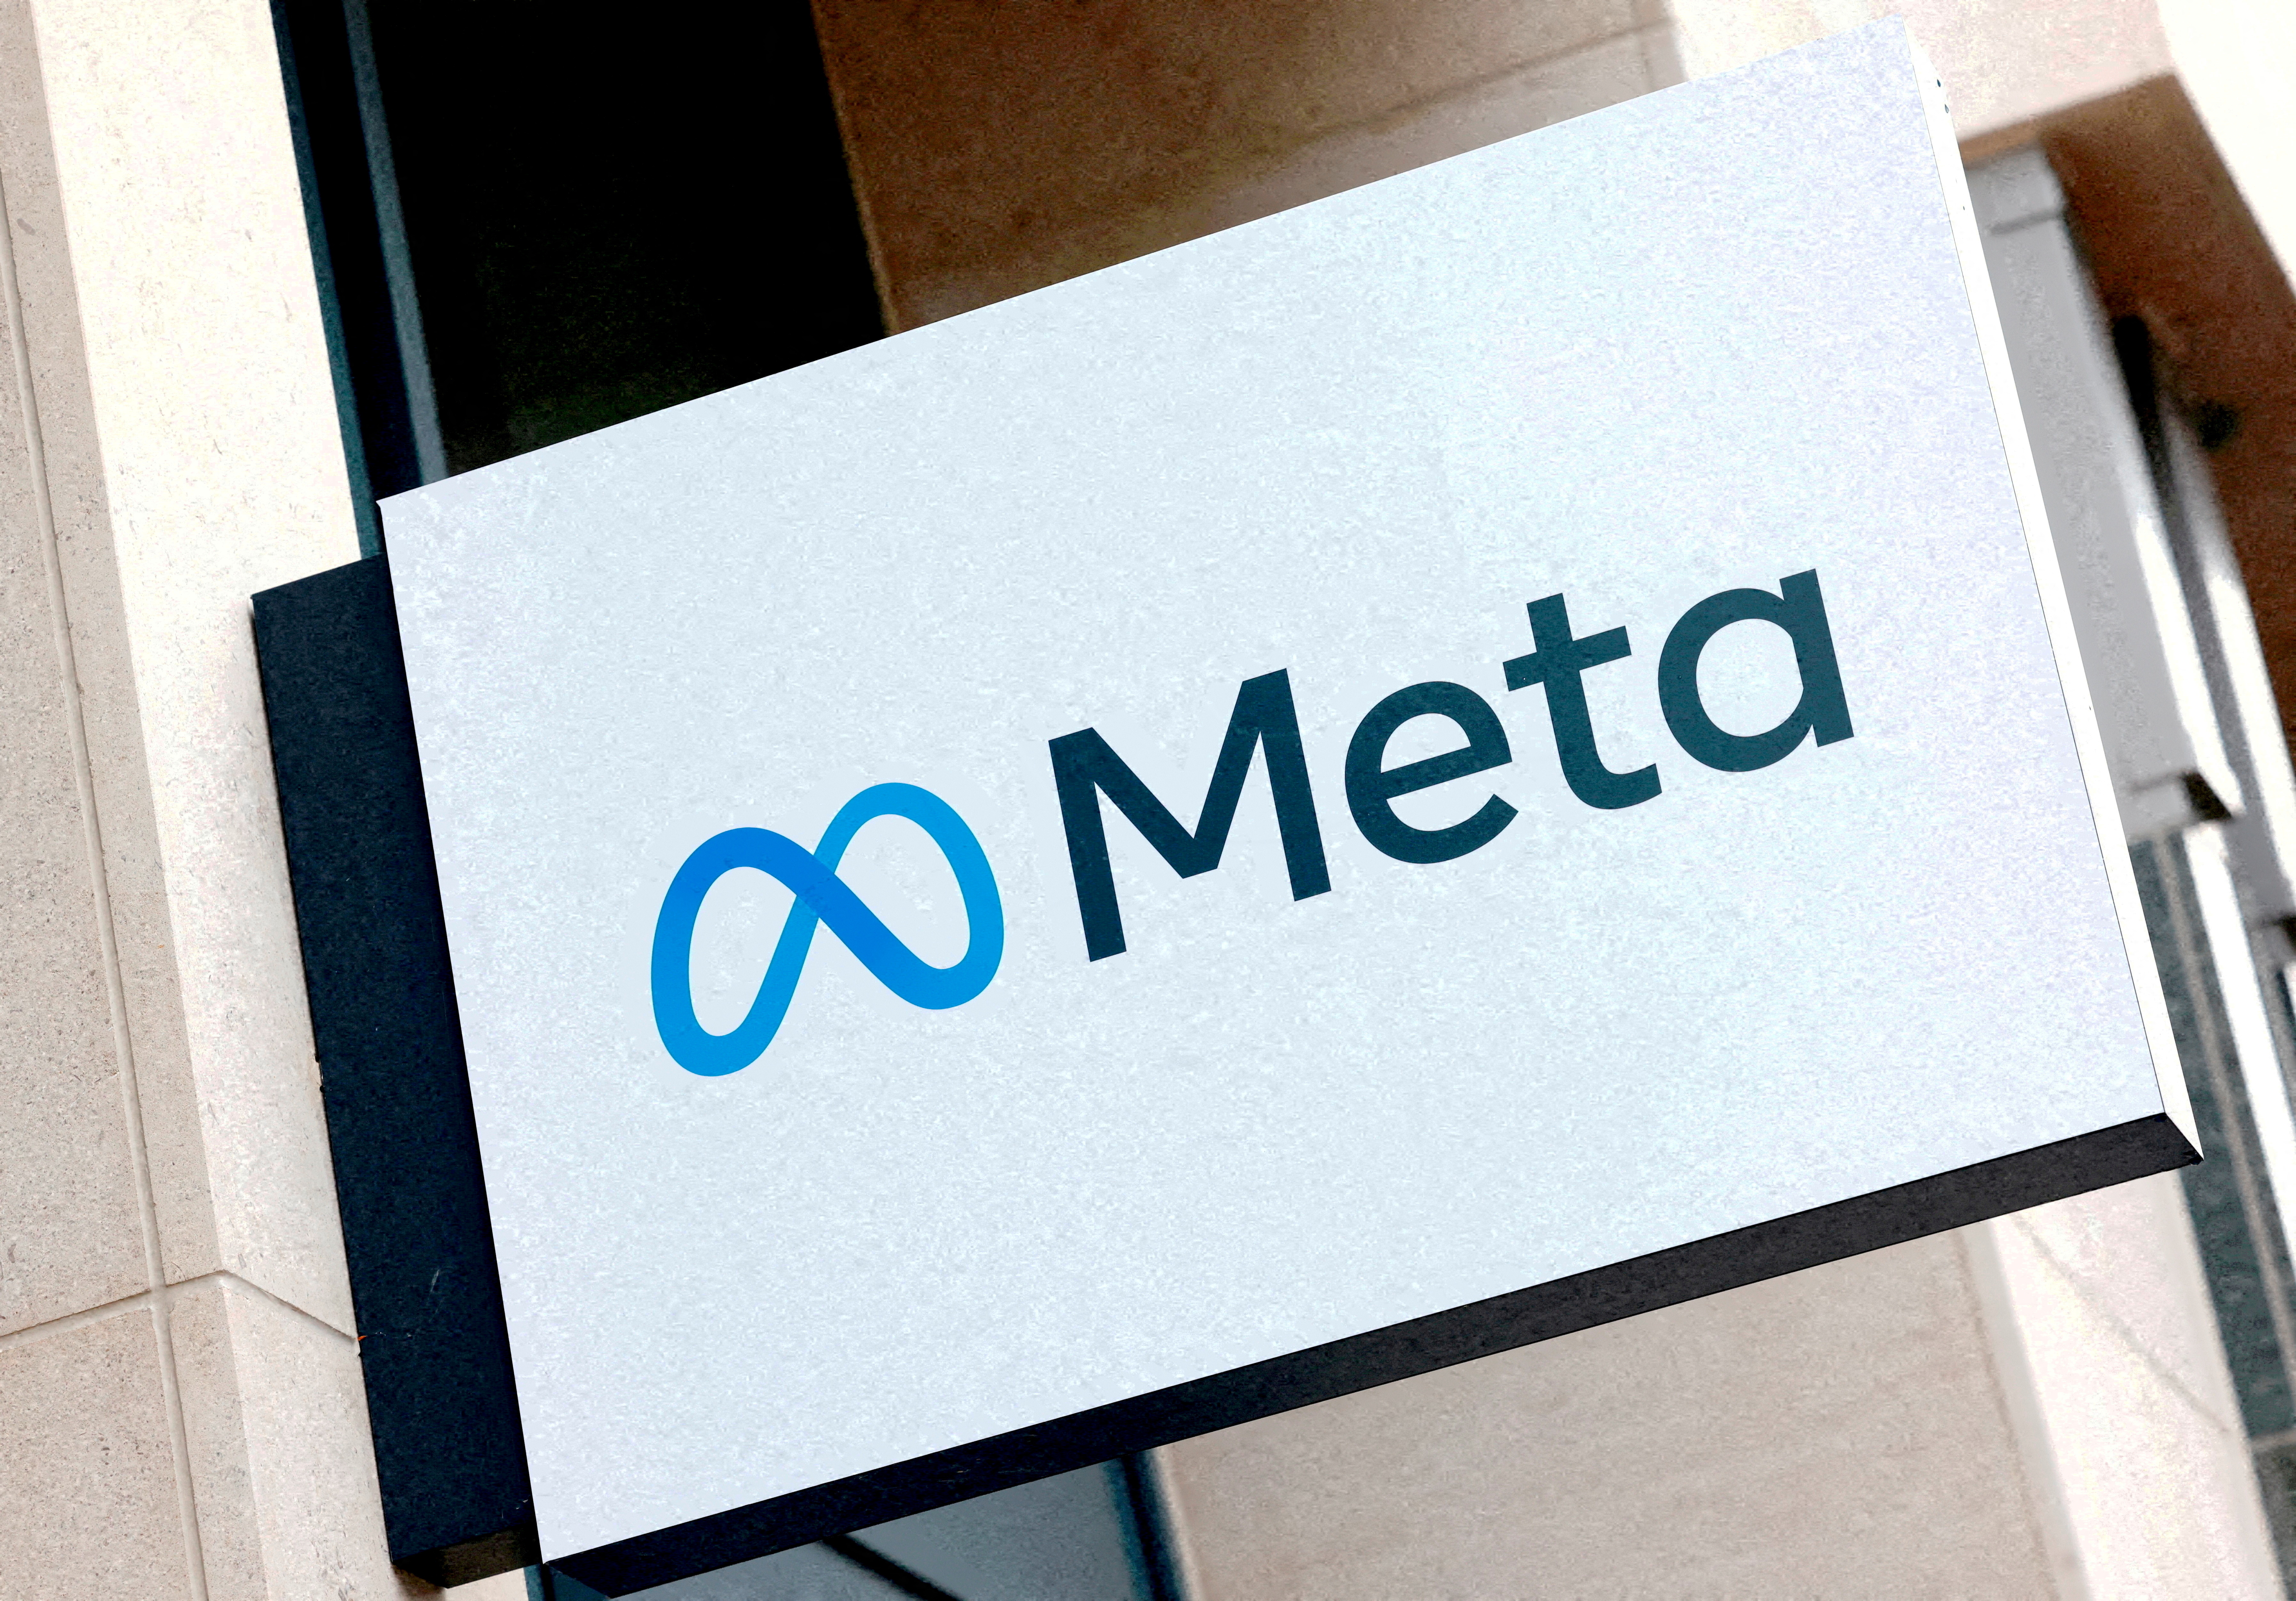 Judge allows class action case against Meta to move forward